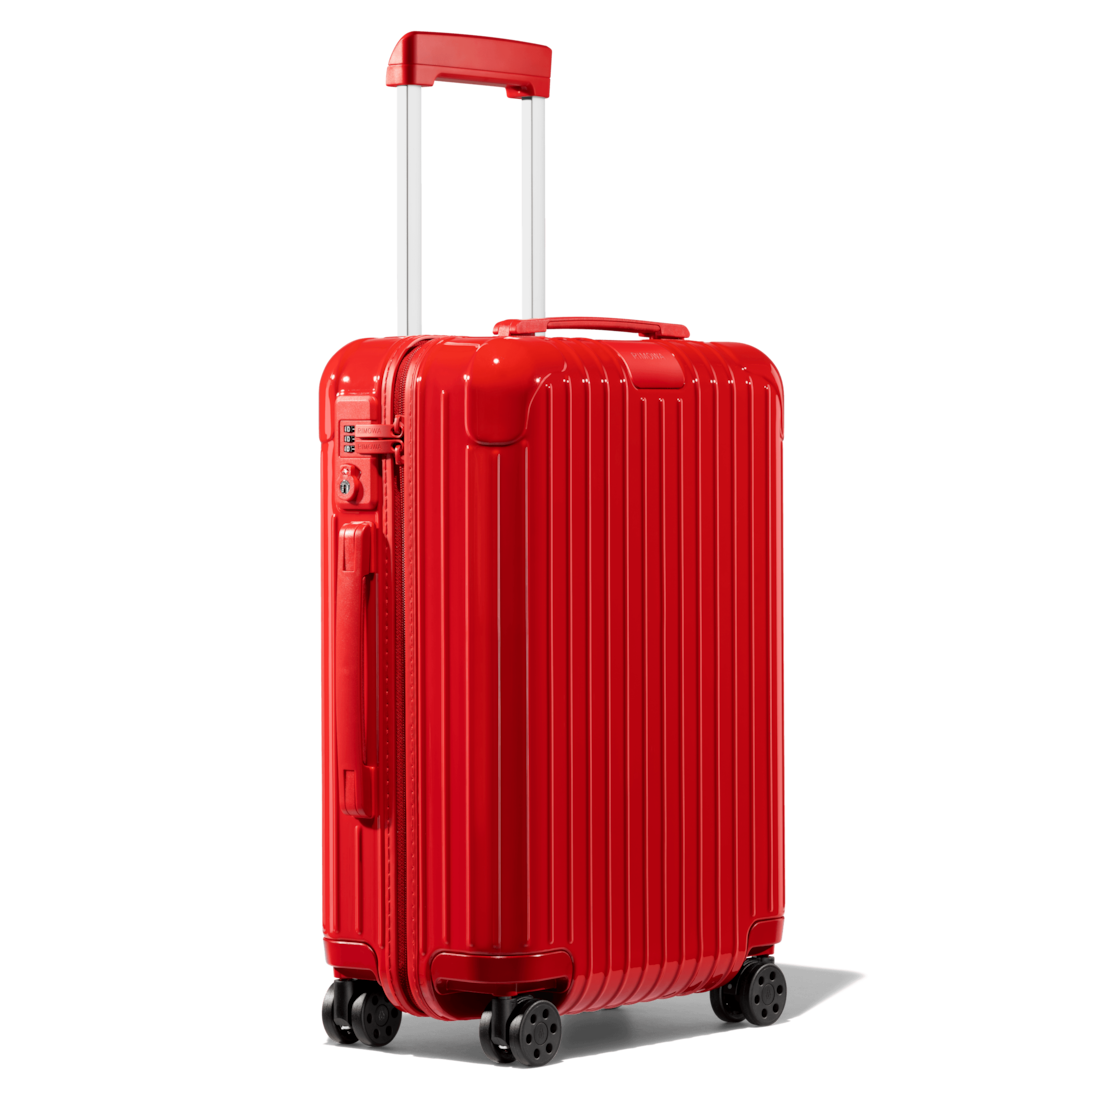 Essential Cabin S Lightweight Carry-On Suitcase | Red | RIMOWA